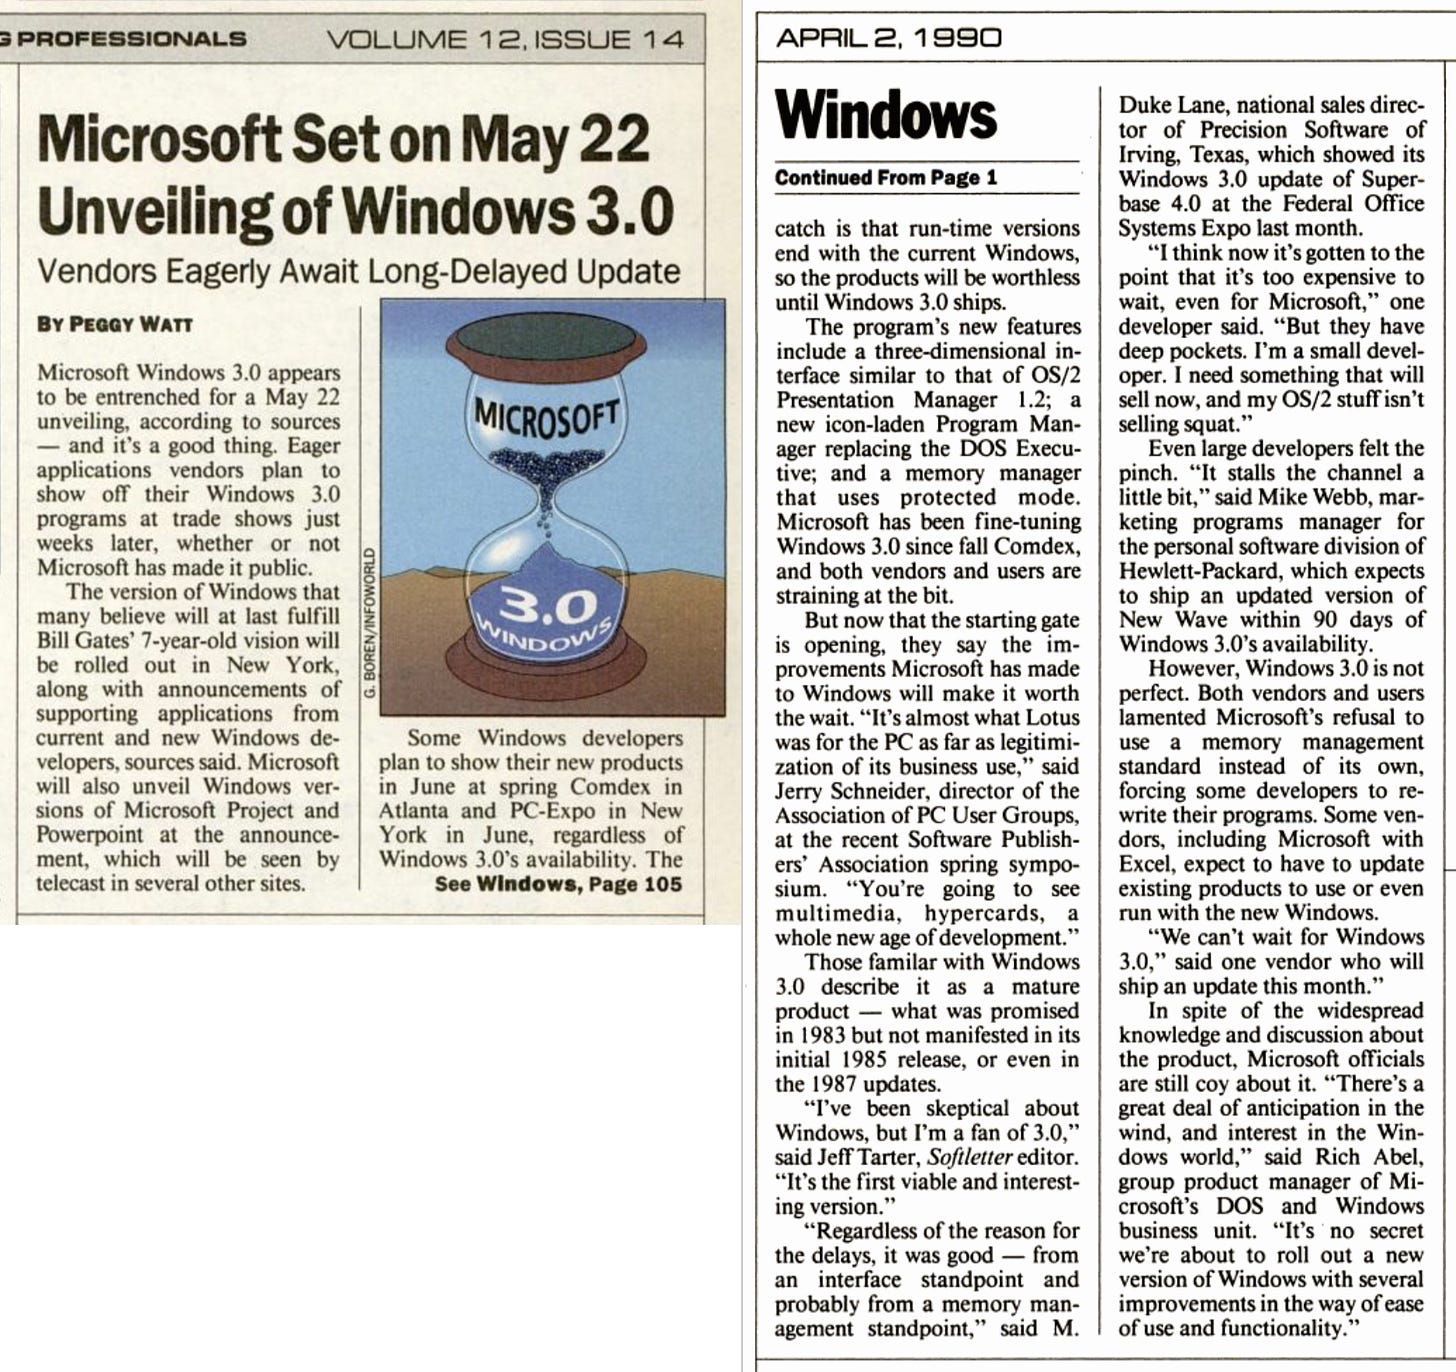 Infoworld Magazine from April 1990 with headline Microsoft Set on May 22 Unveiling of Windows 3.0